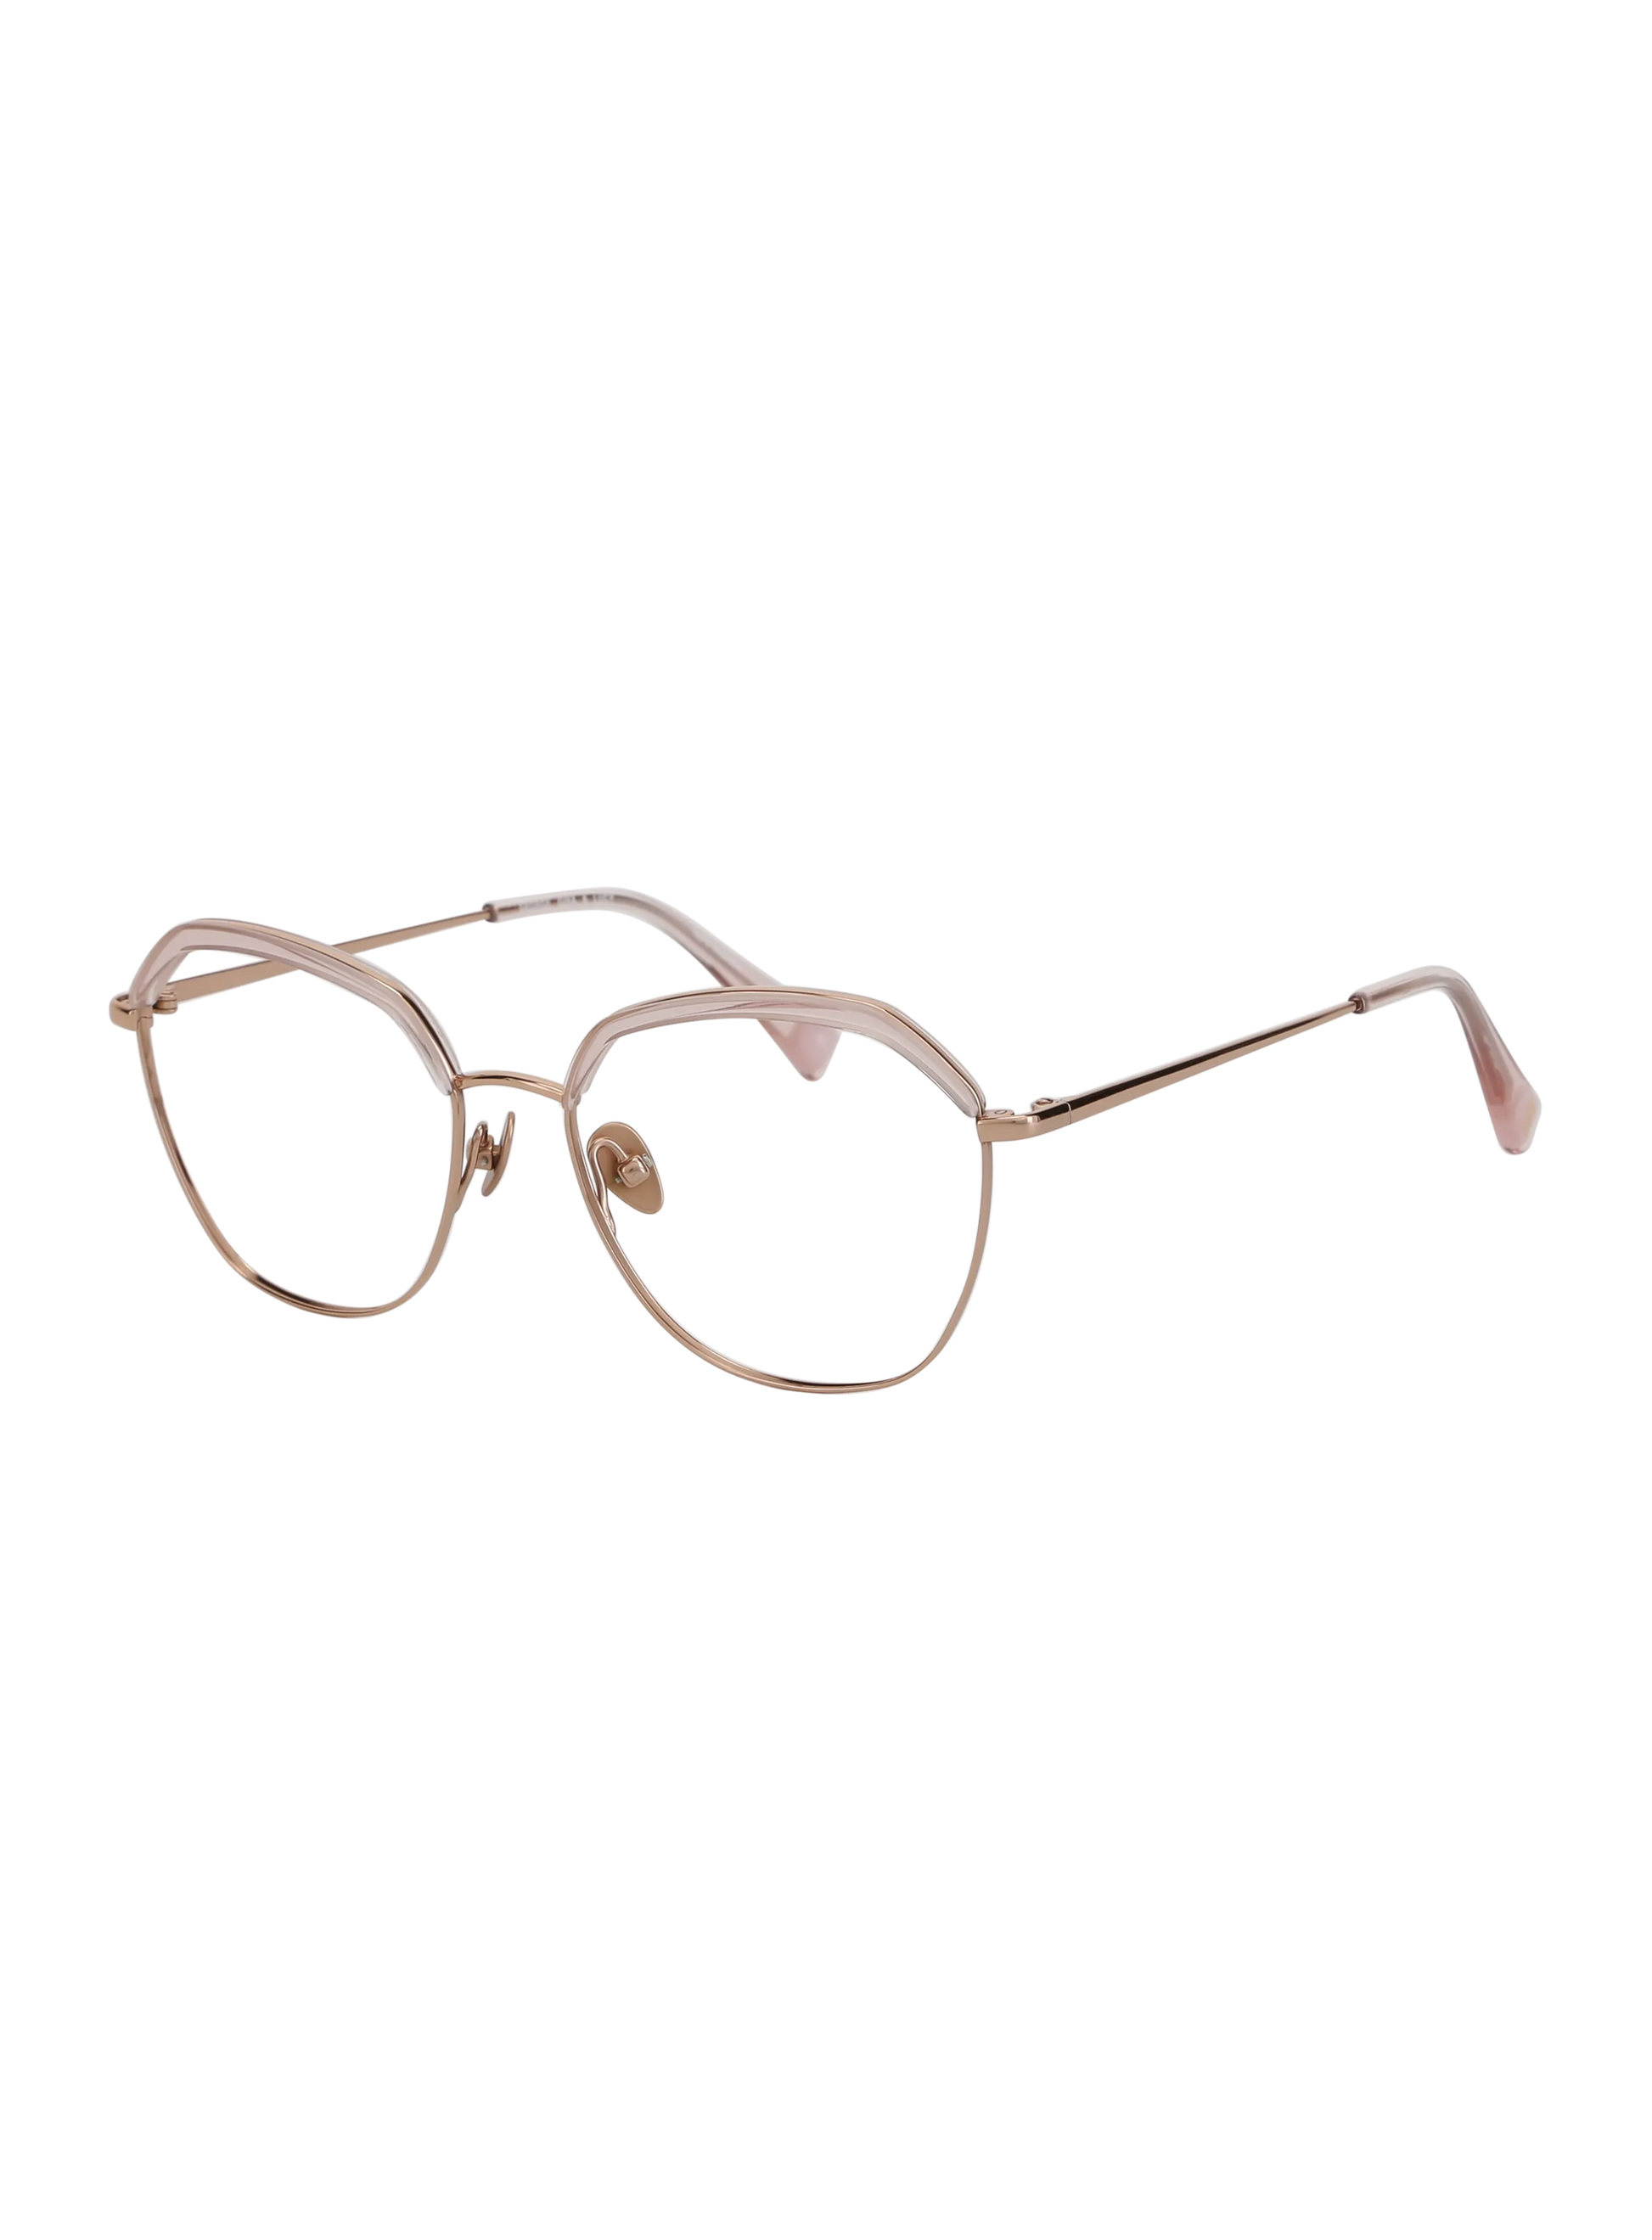 Farbe_rosegold clear rose 004